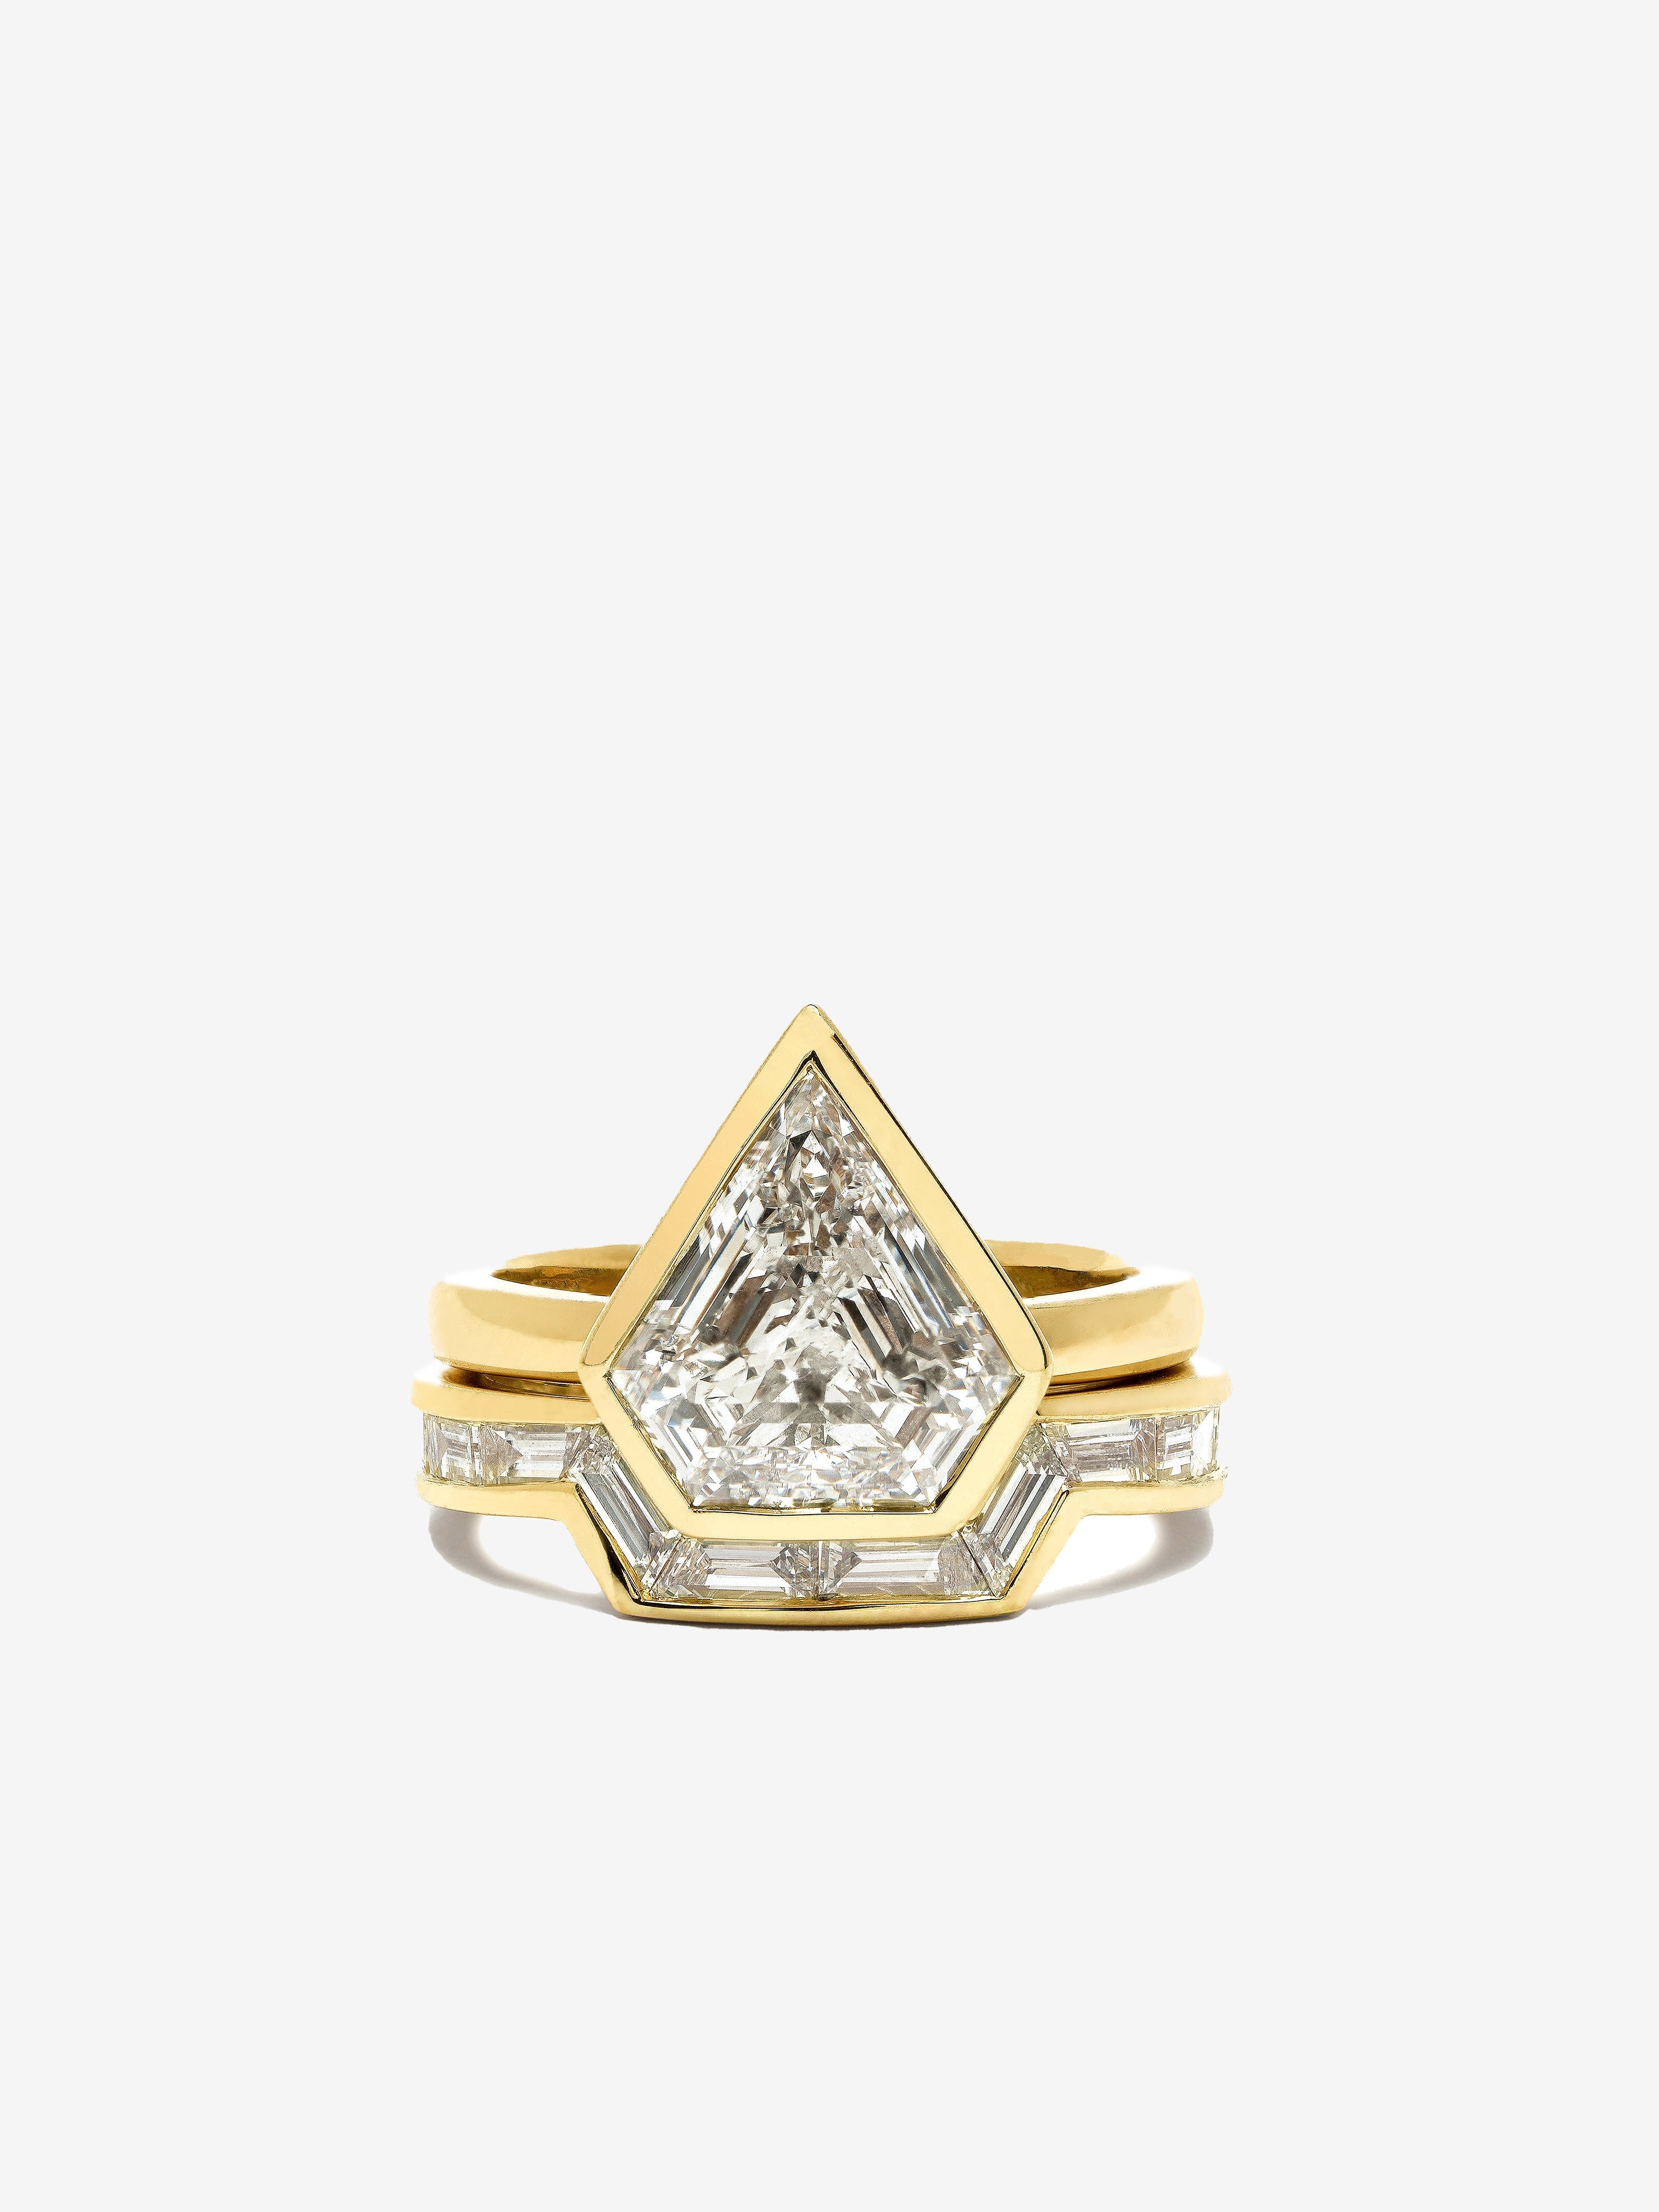 Shield Diamond Ring with Baguette Diamond Silhouette Band